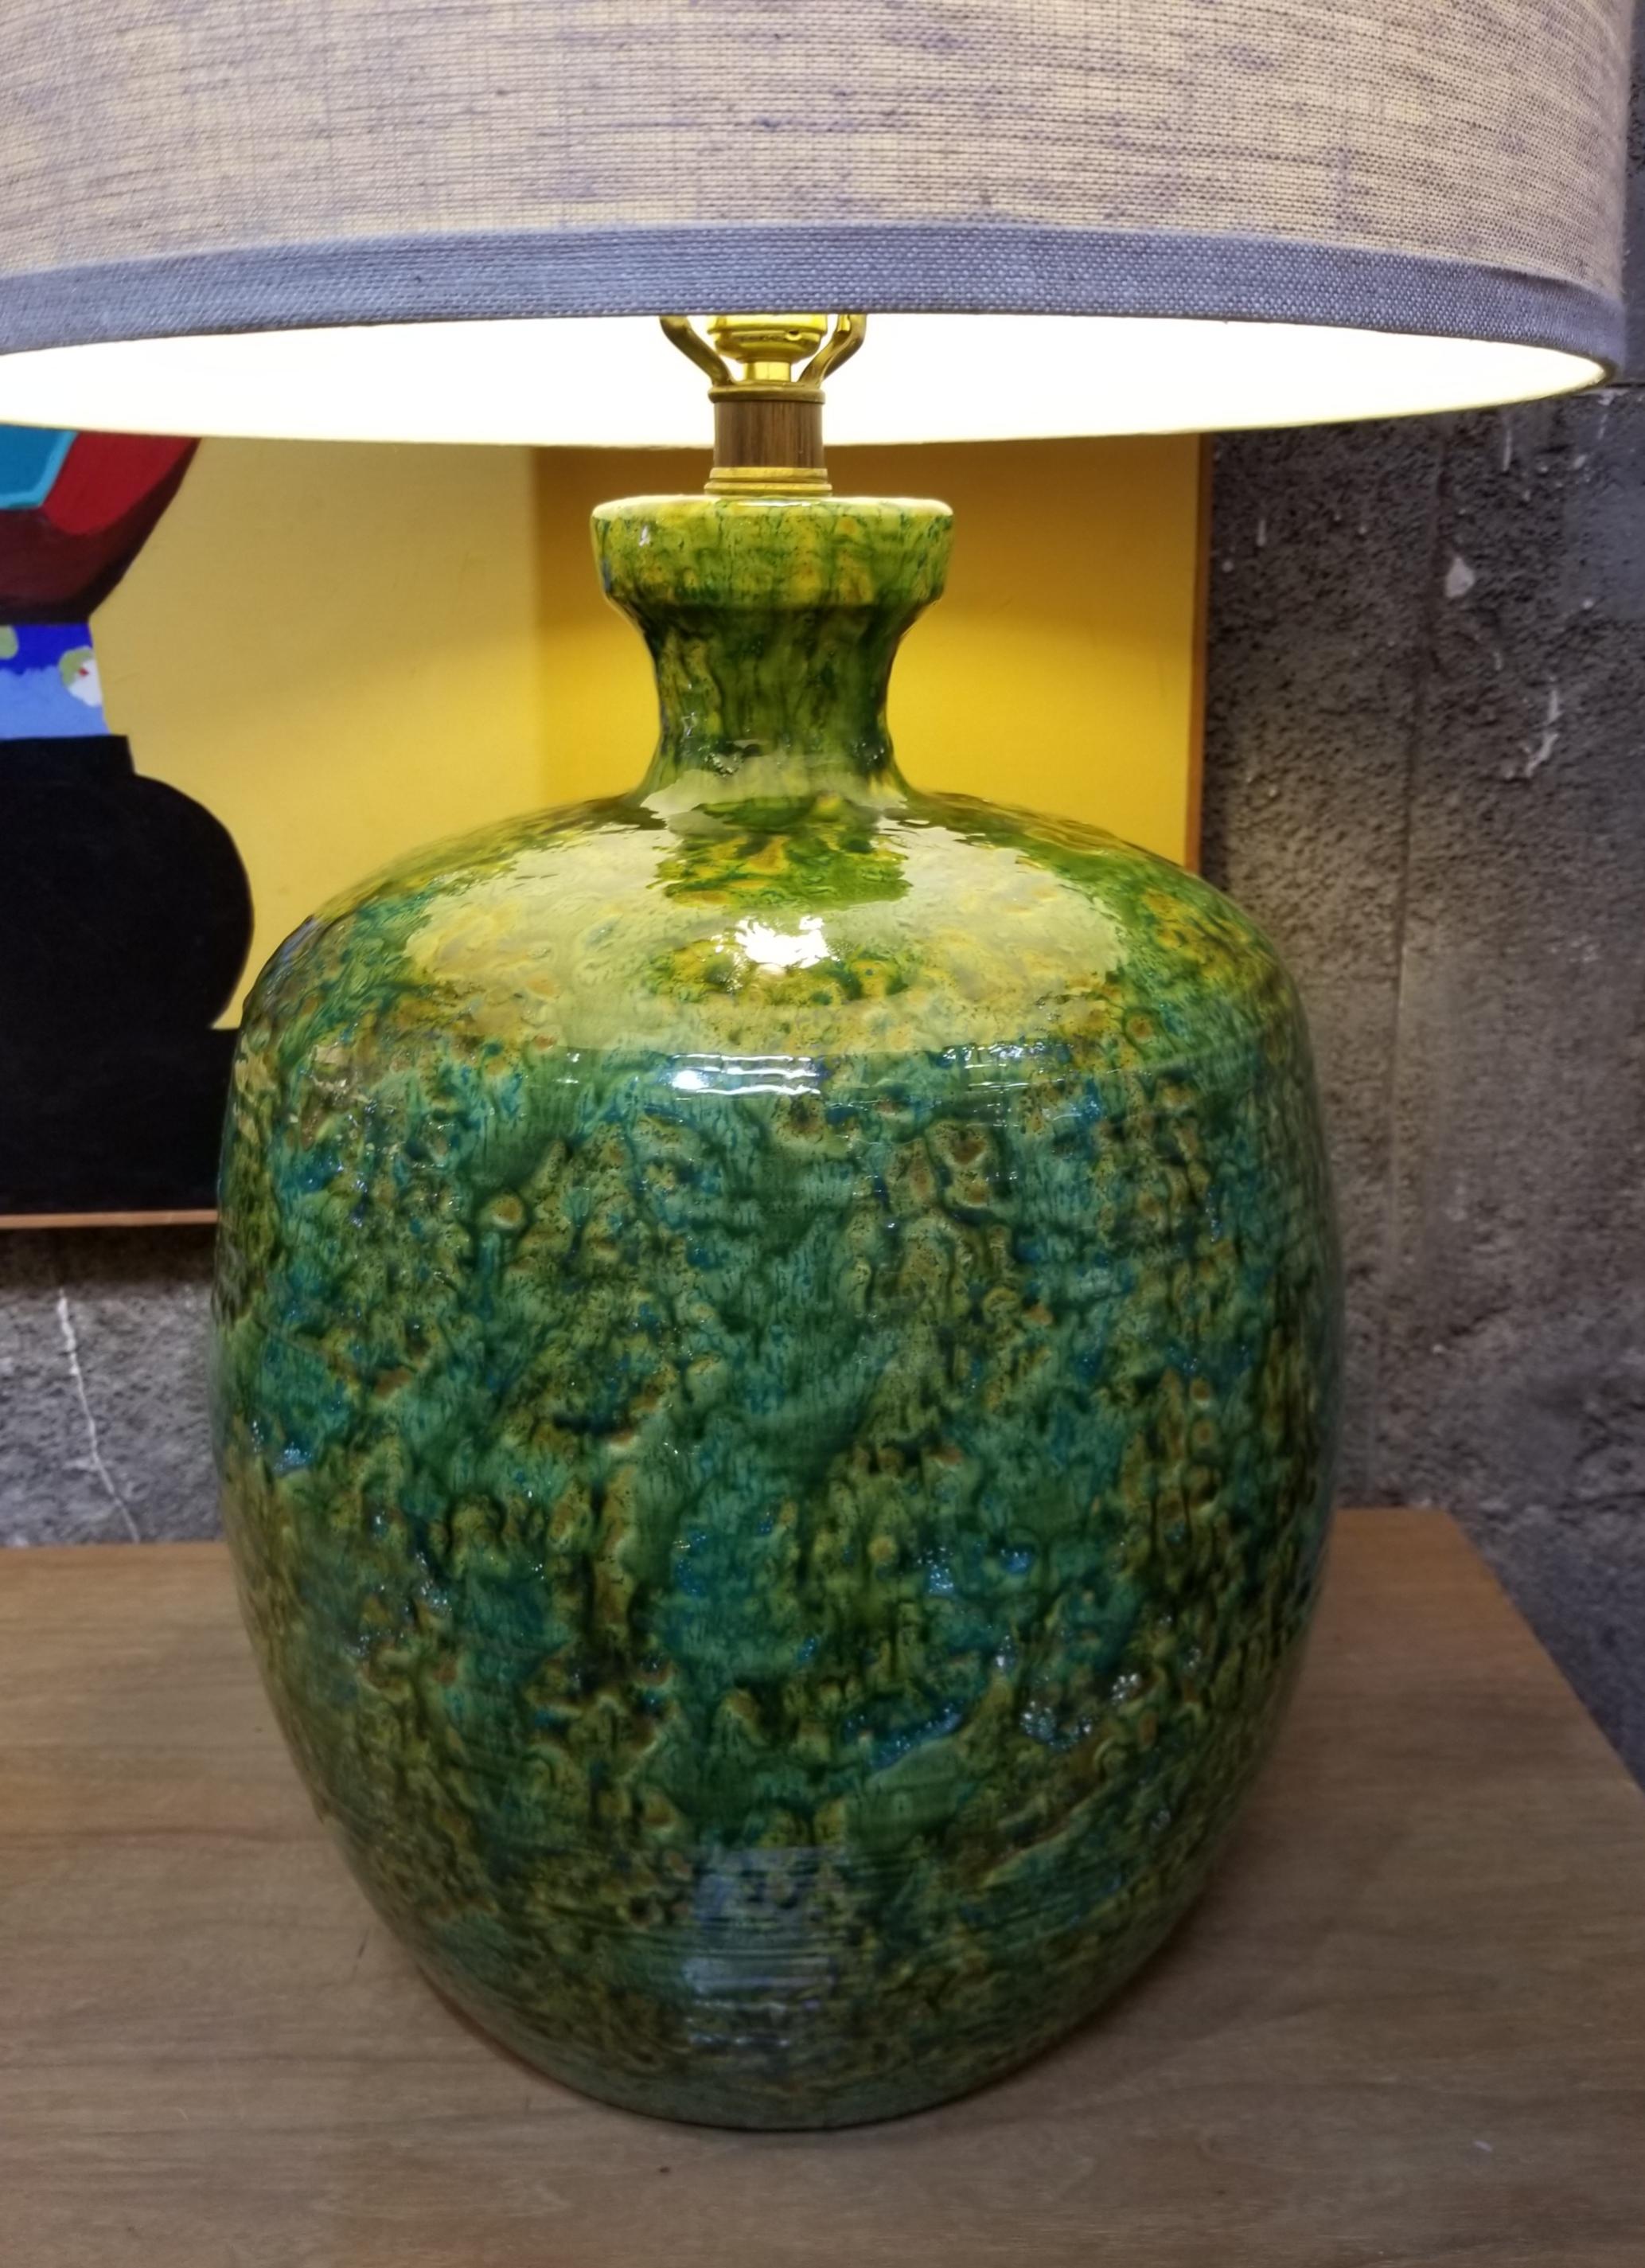 large green lamps